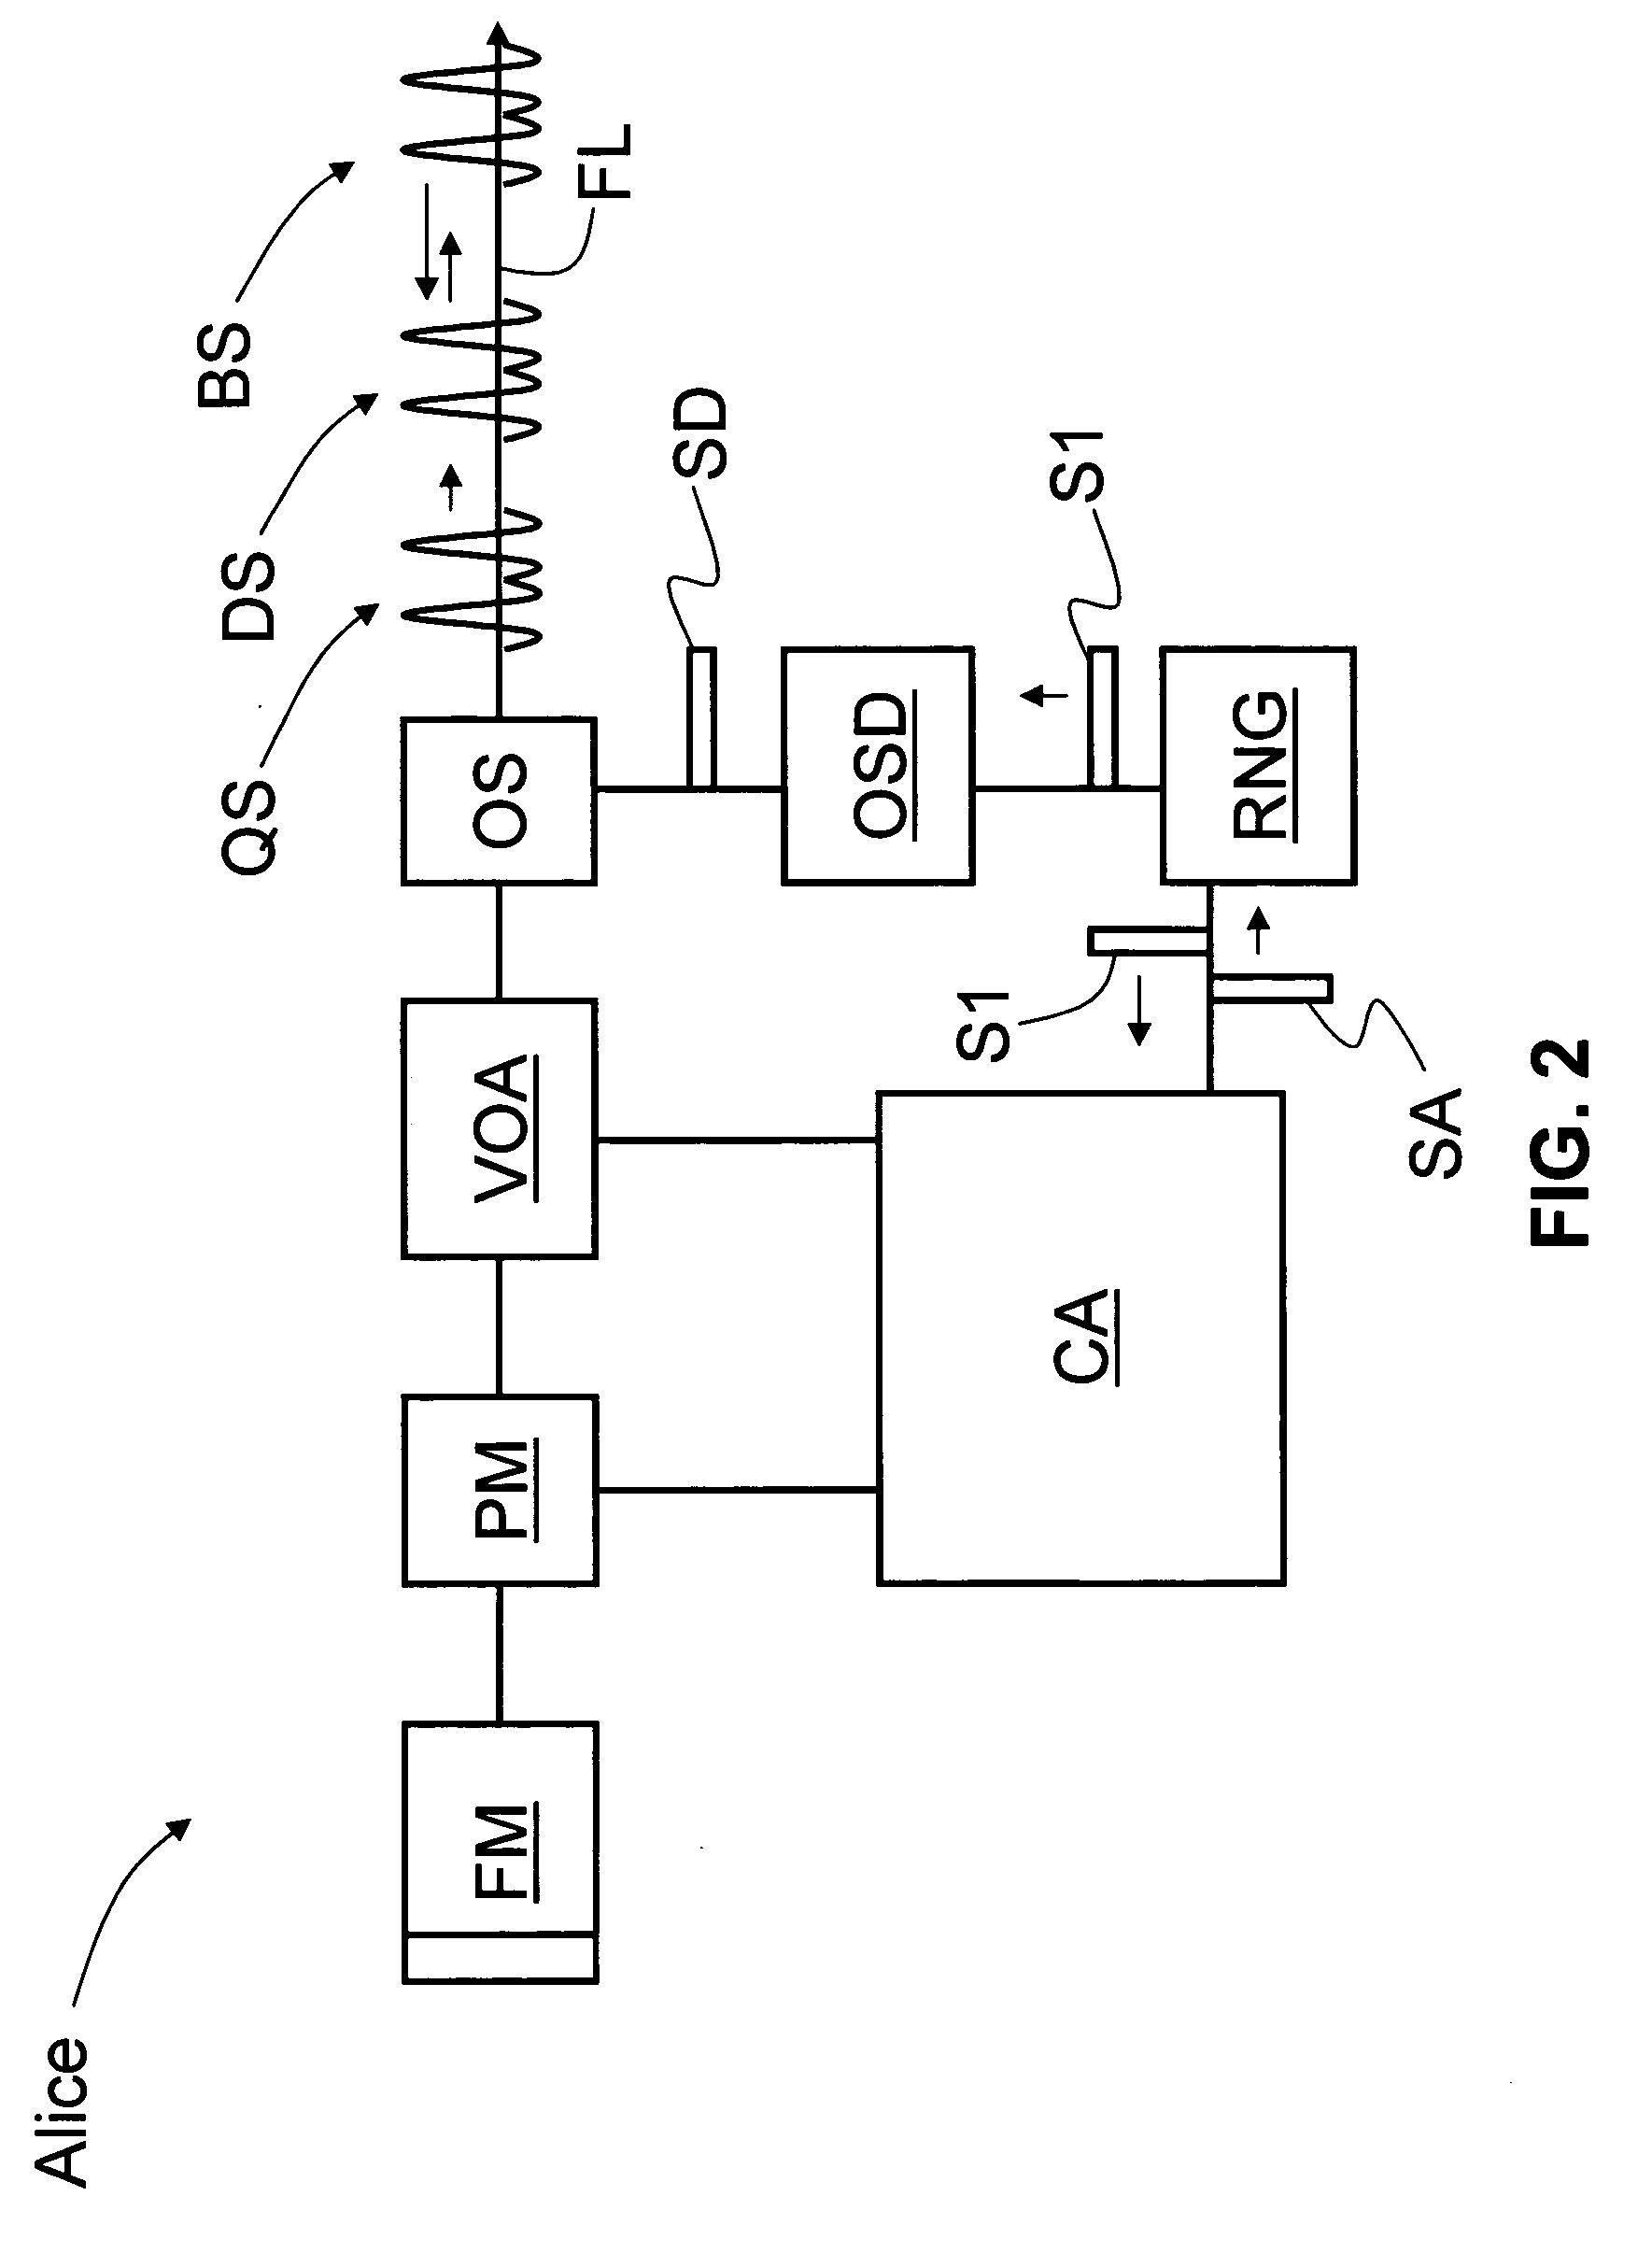 QKD station with efficient decoy state capability